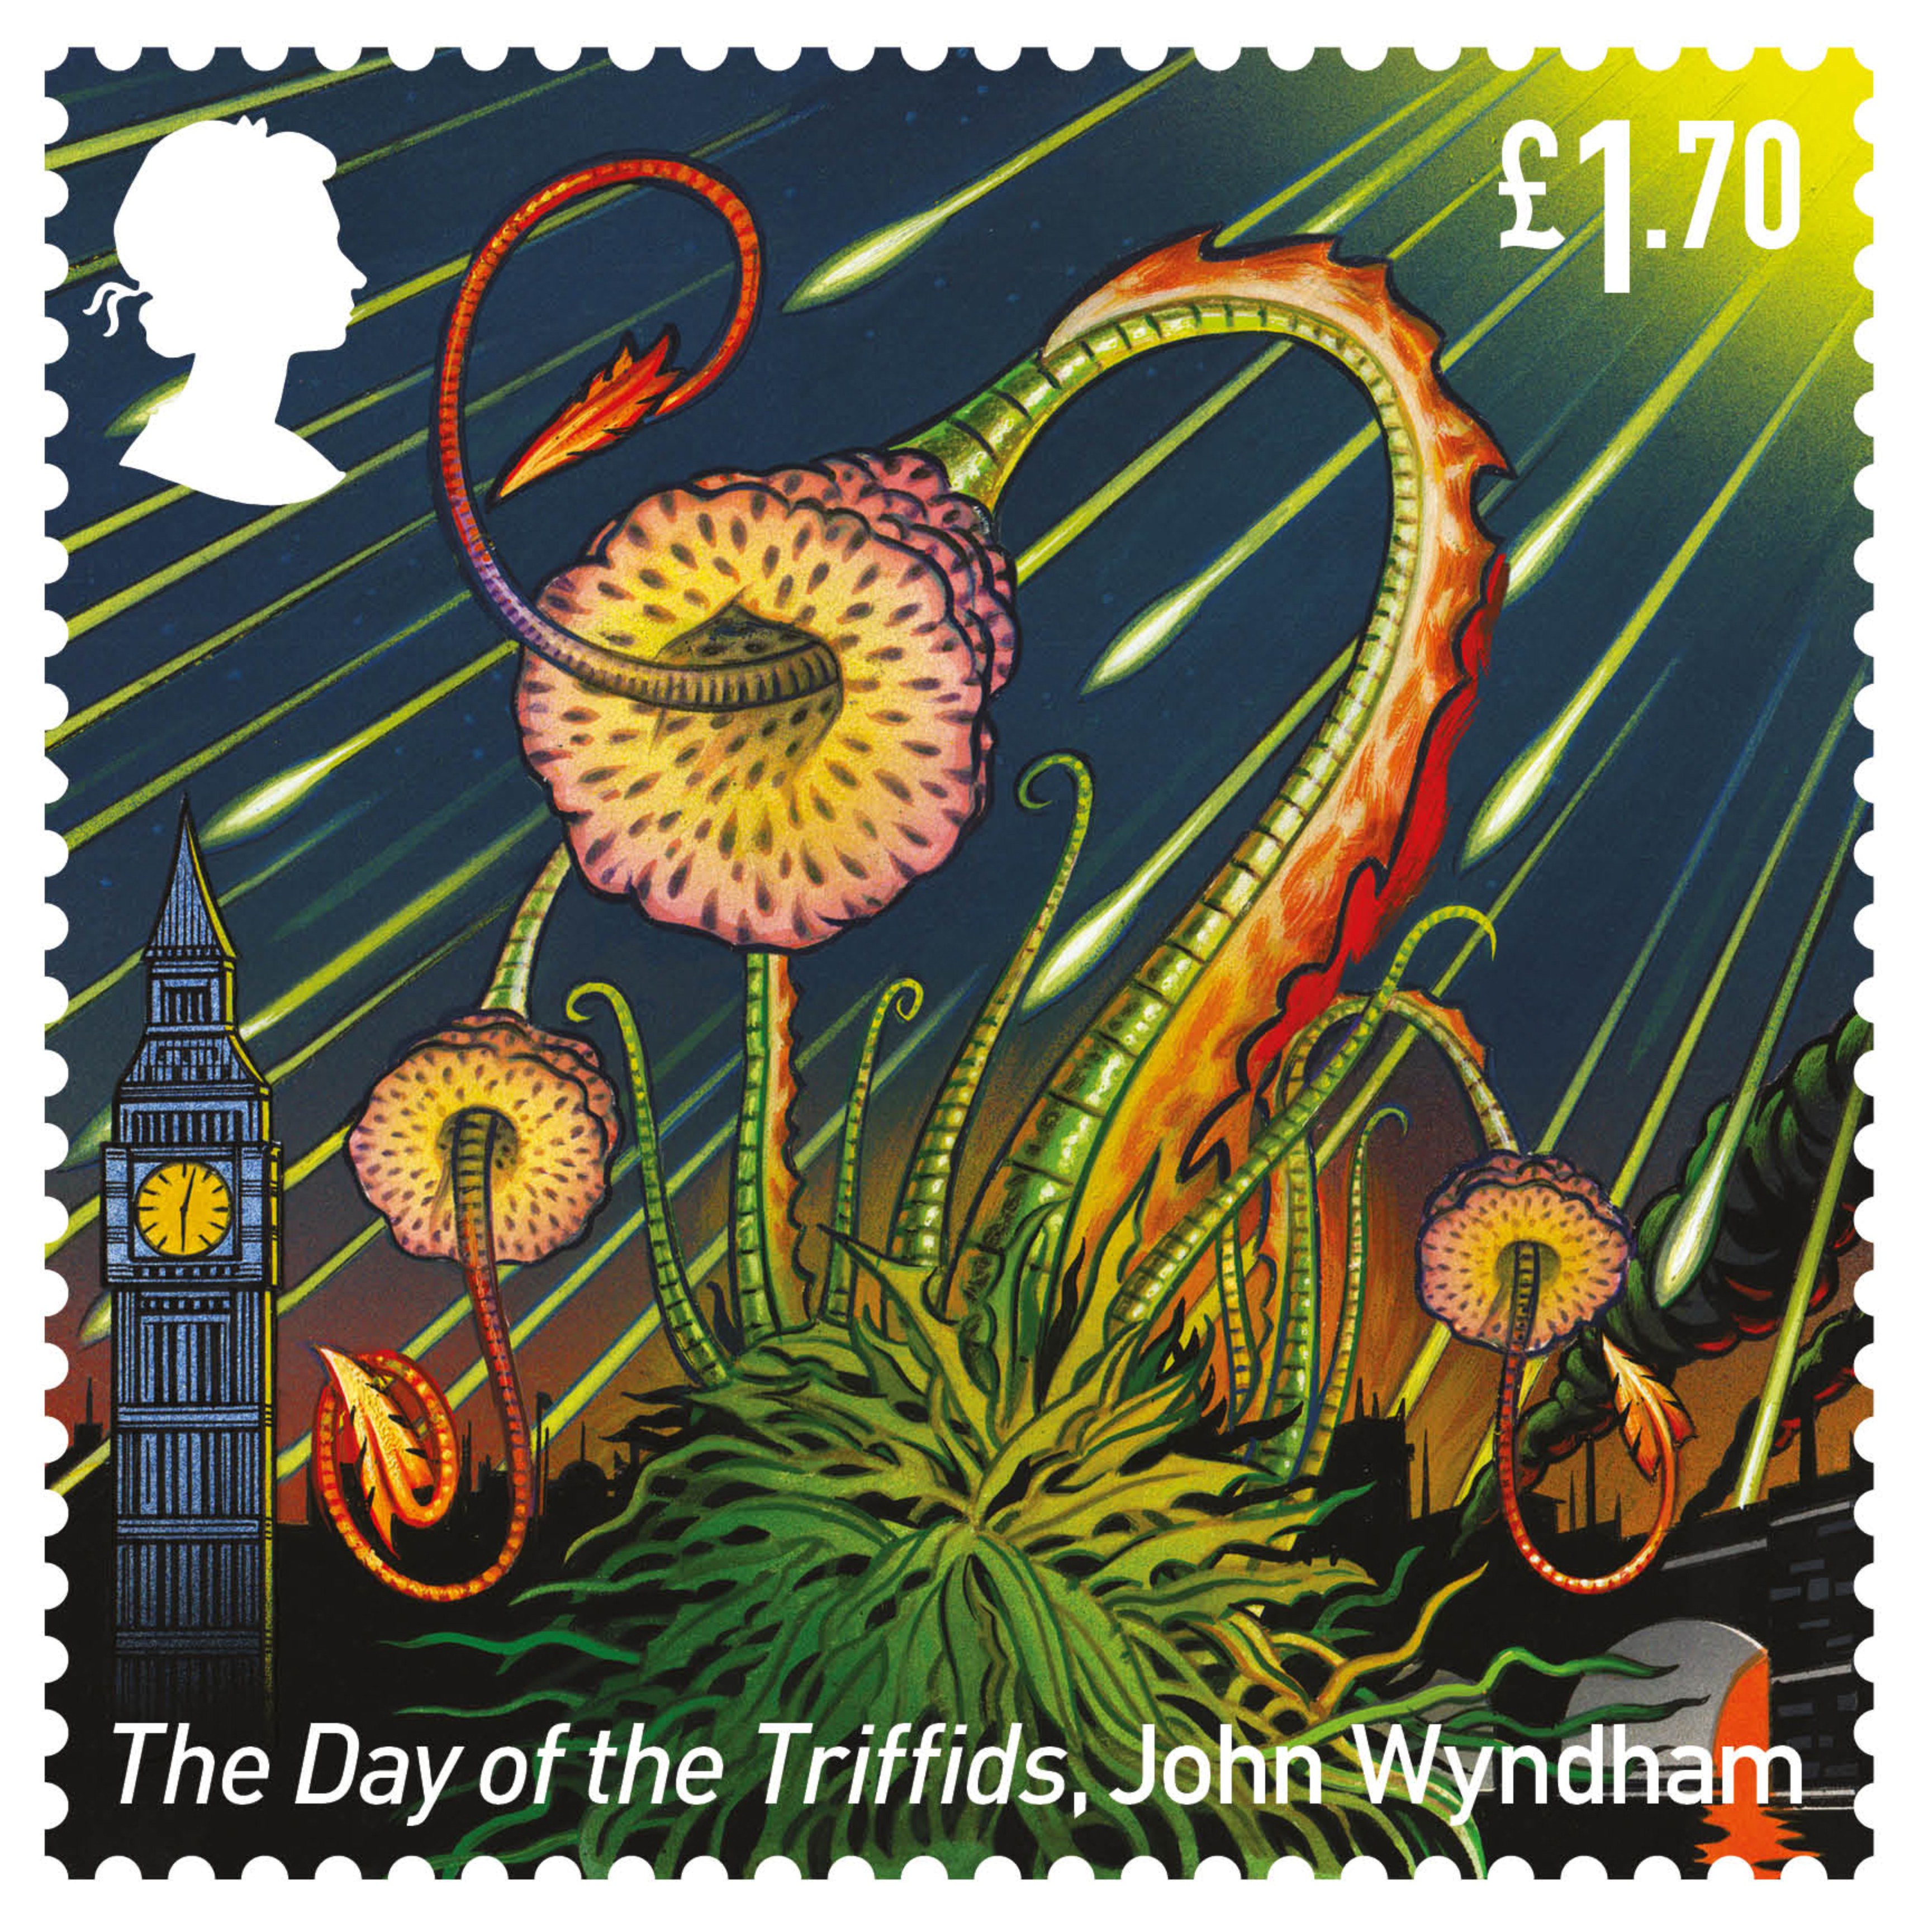 The Day Of The Triffids stamp